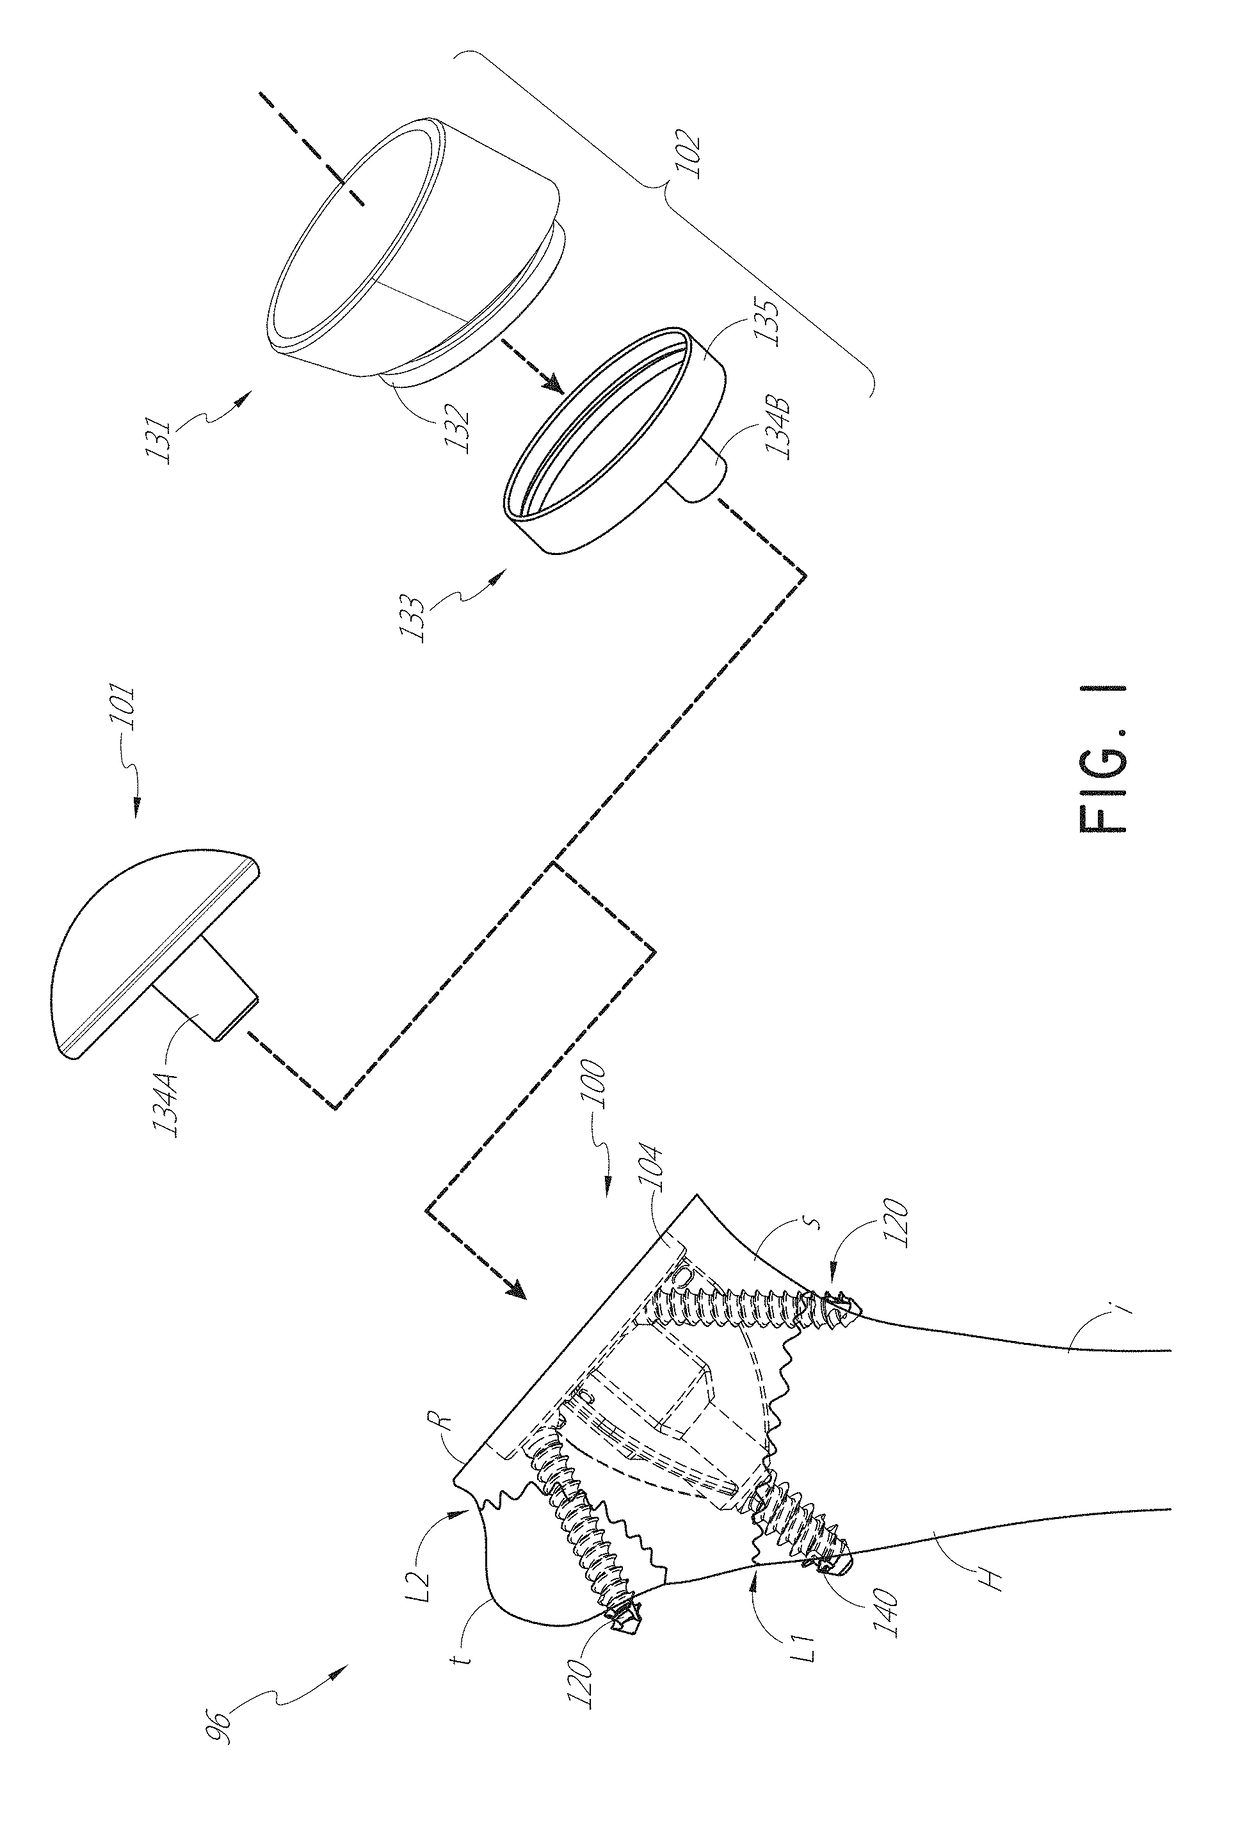 Stemless shoulder implant with fixation components